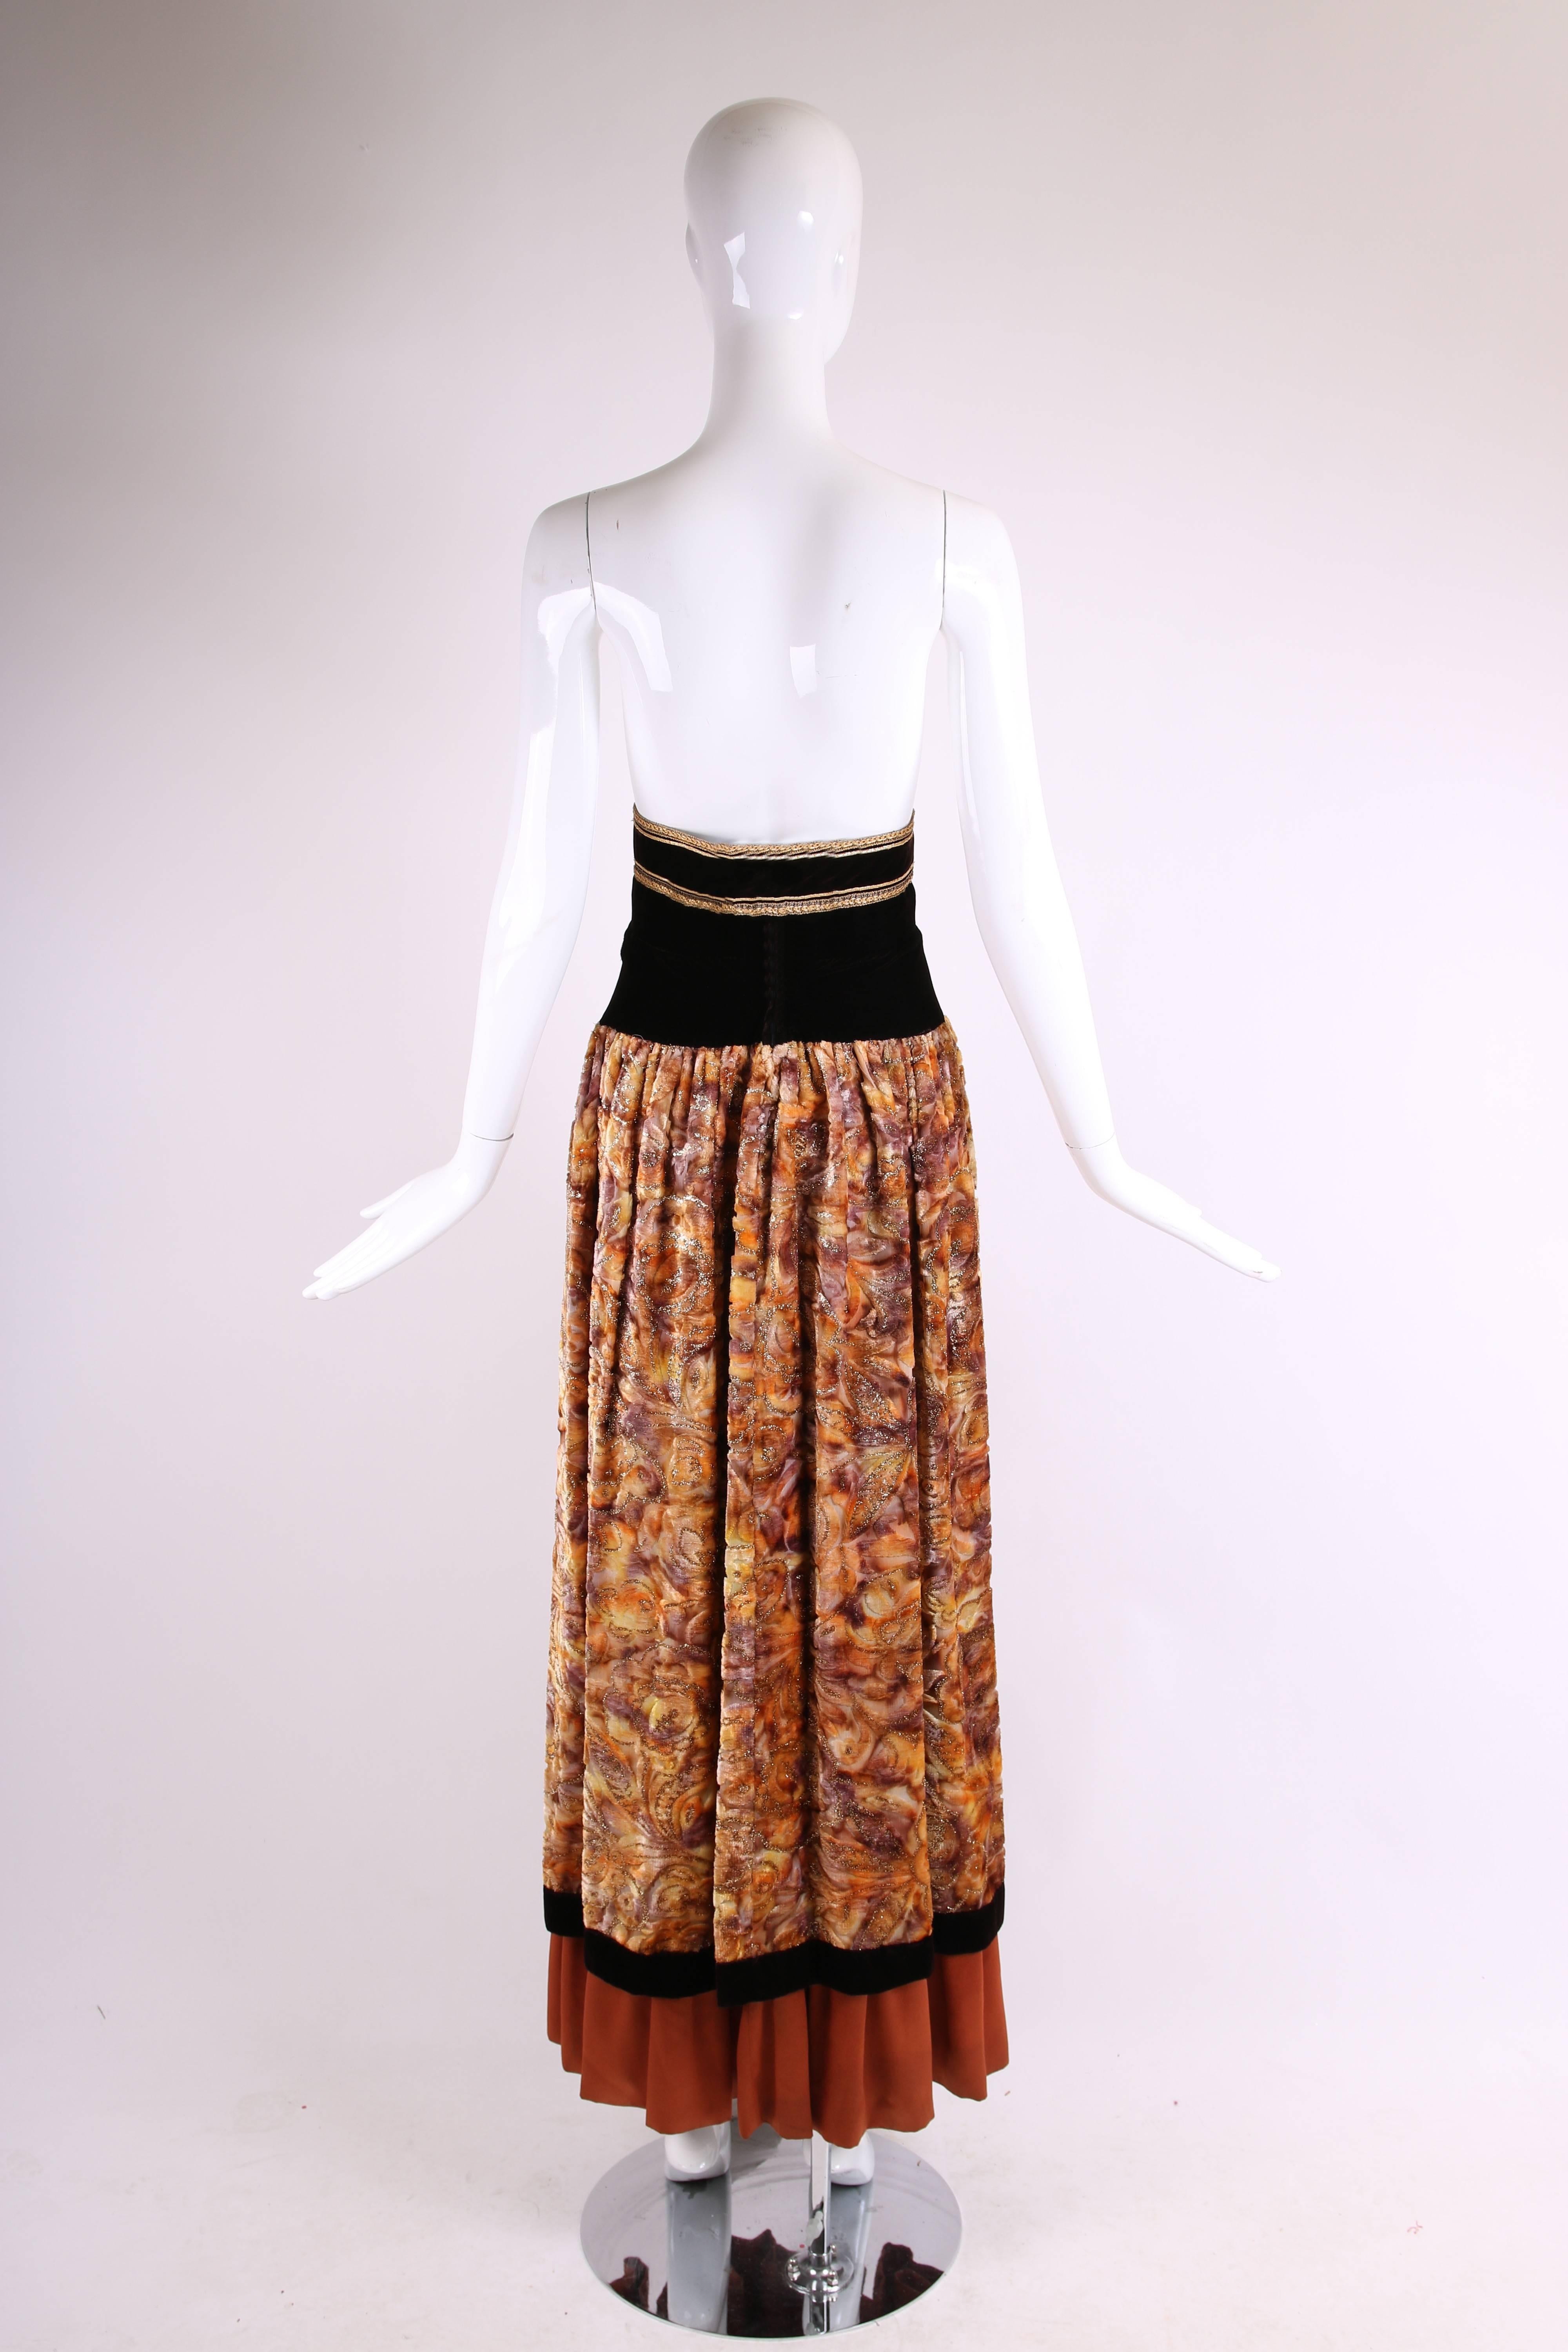 Unlabeled YSL-Inspired Velvet Burnout Maxi Skirt w/Gold Metallic Trim & Cord In Good Condition For Sale In Studio City, CA